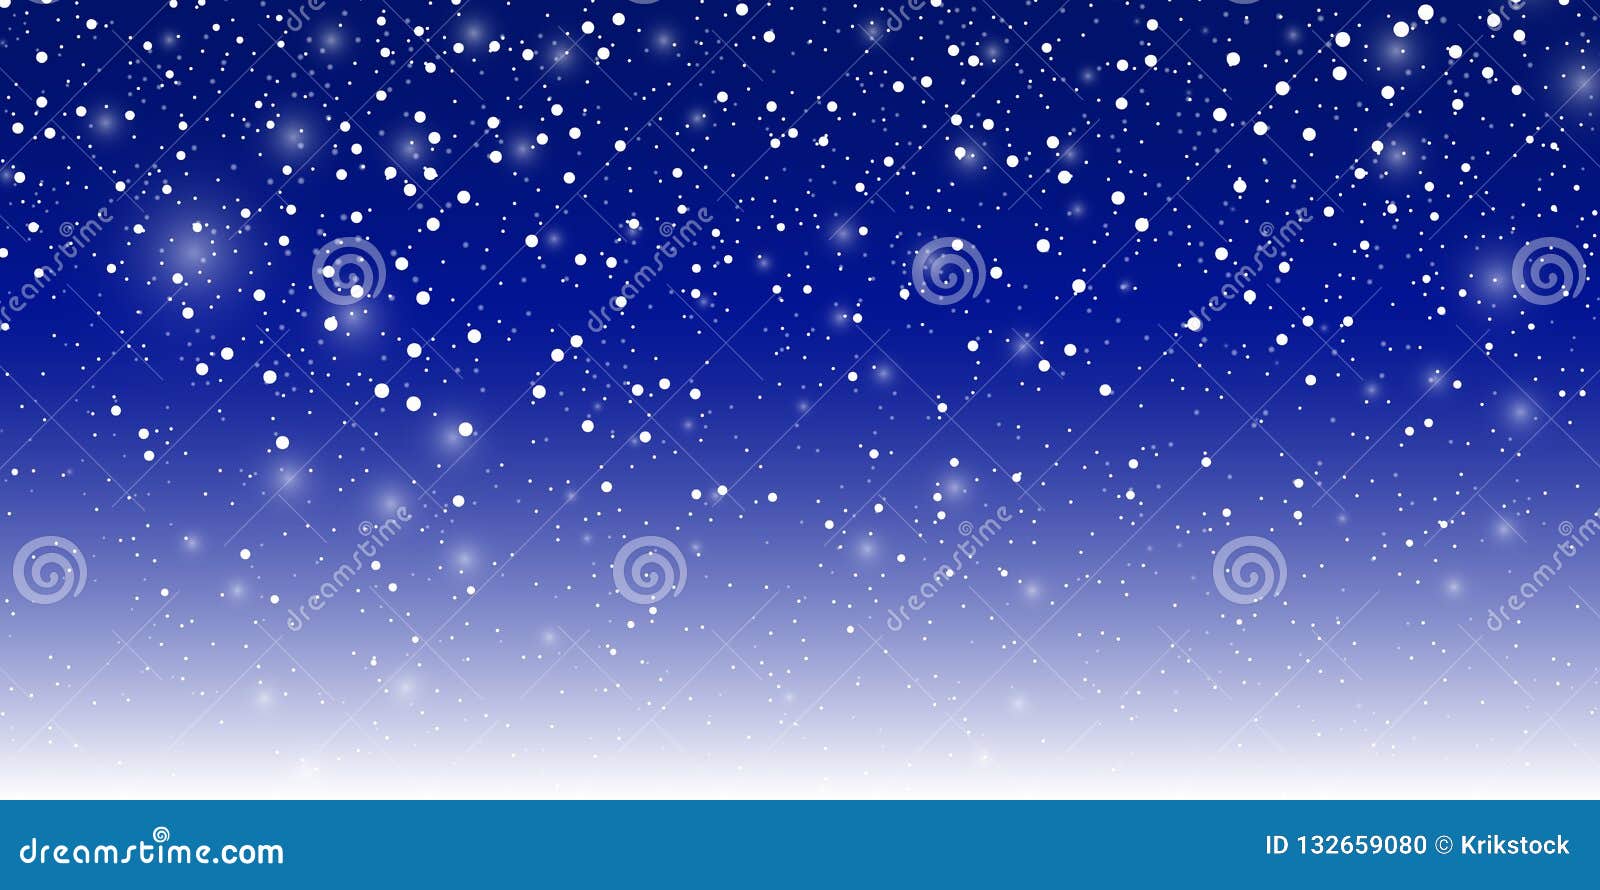 snow background.   with falling snowflakes. winter snowing sky. 